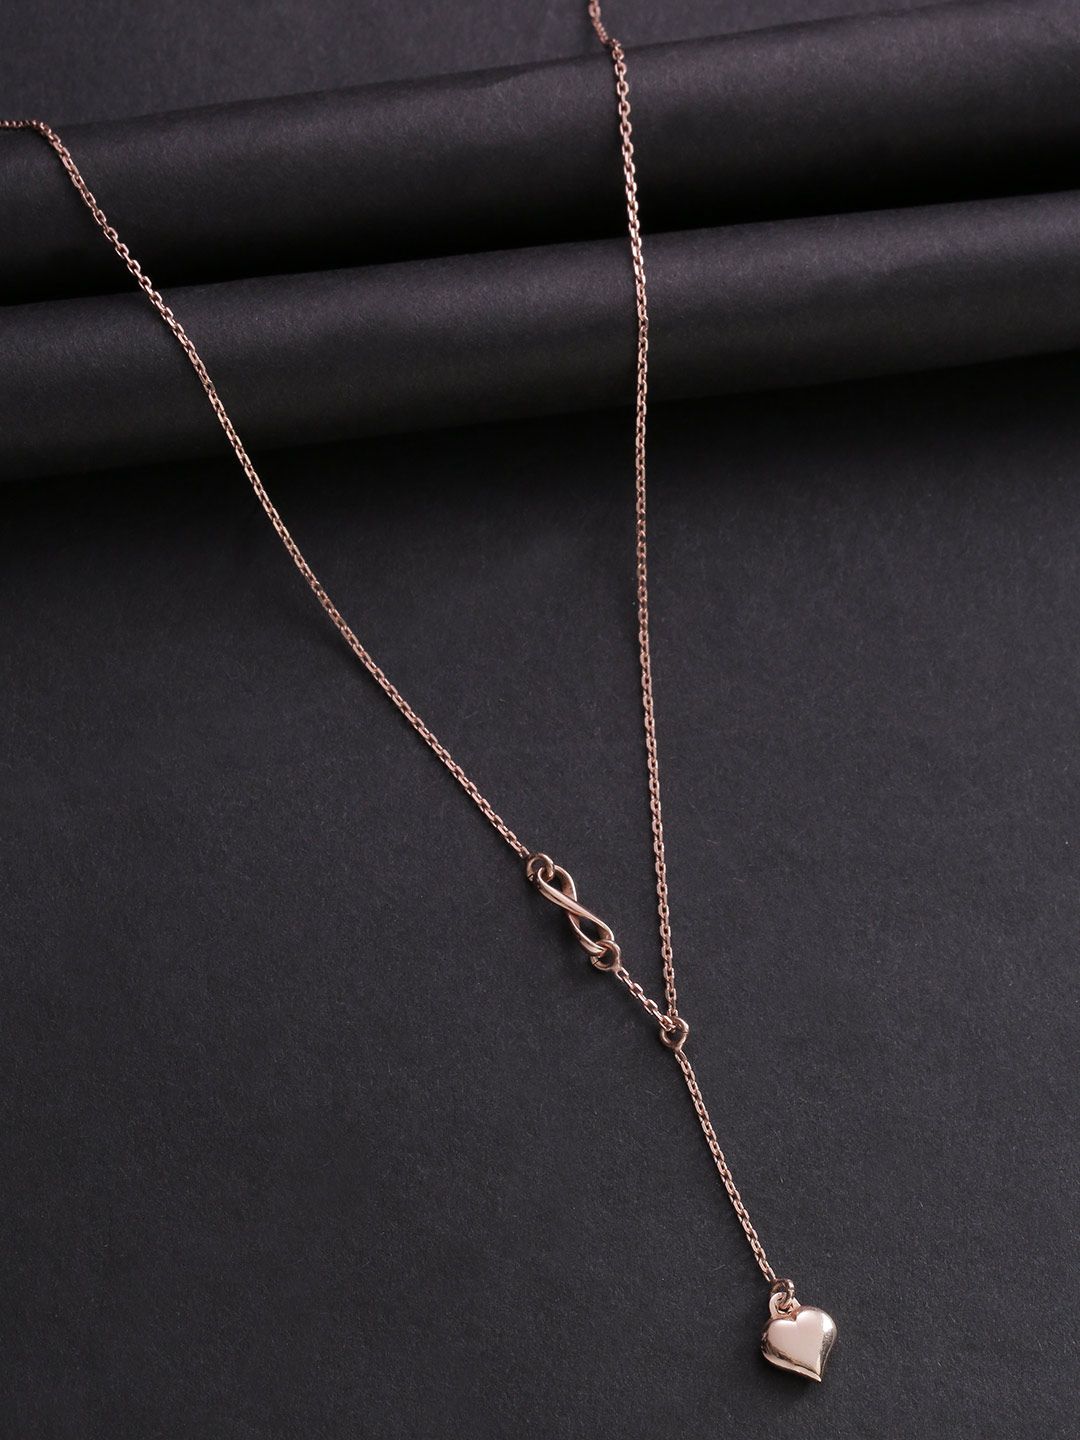 Carlton London Rose Gold-Plated Lariat Necklace Price in India